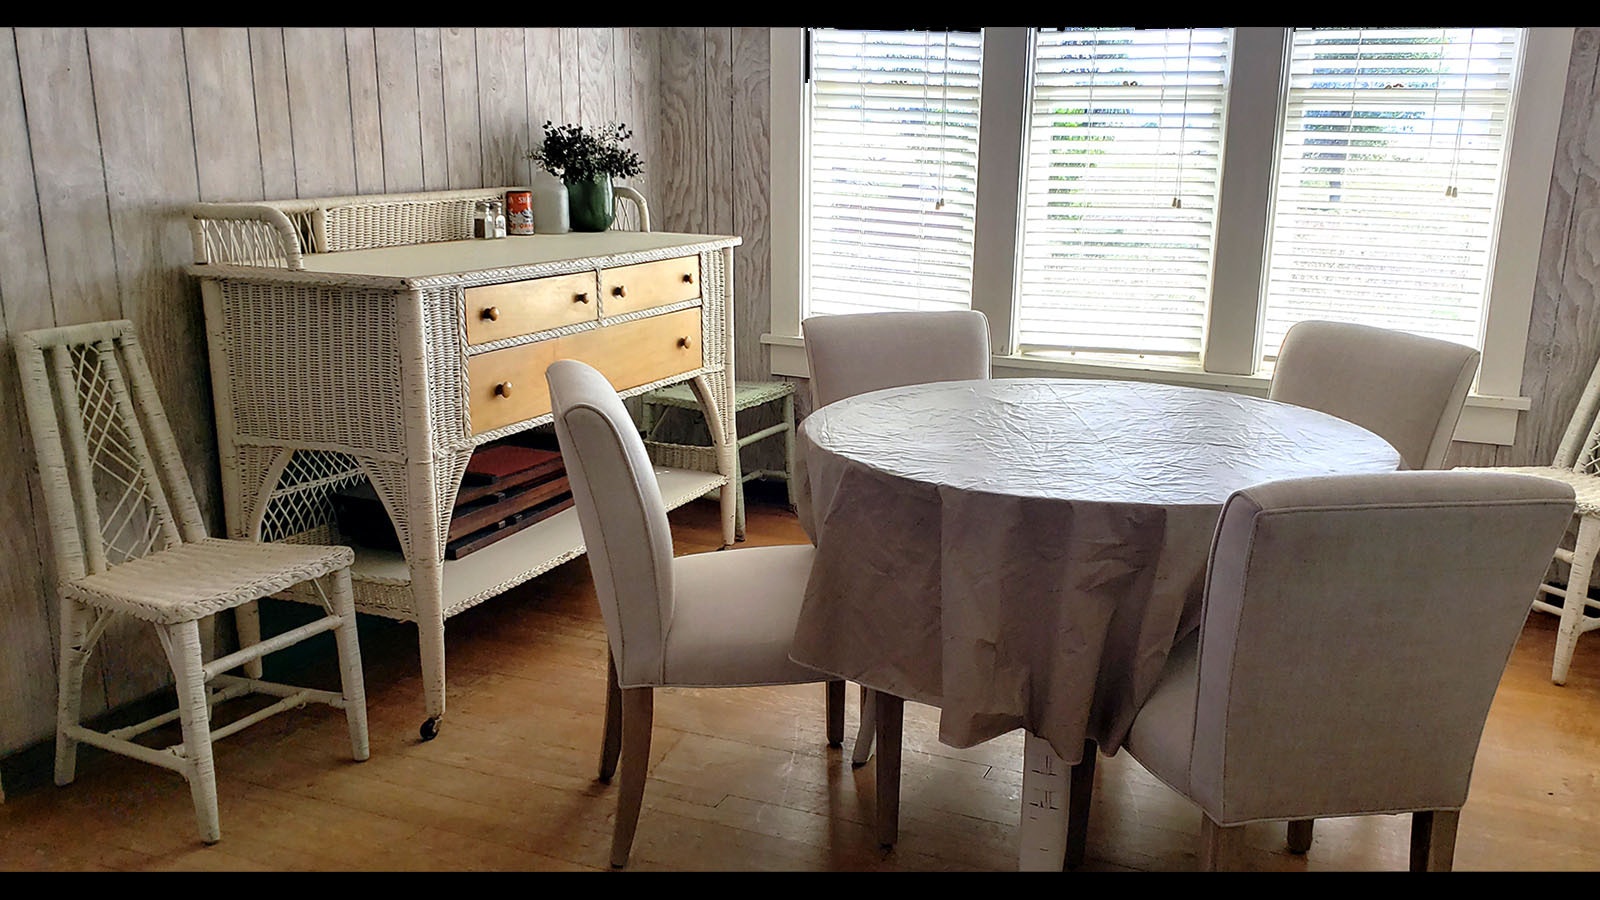 A smaller dining table just off the kitchen.